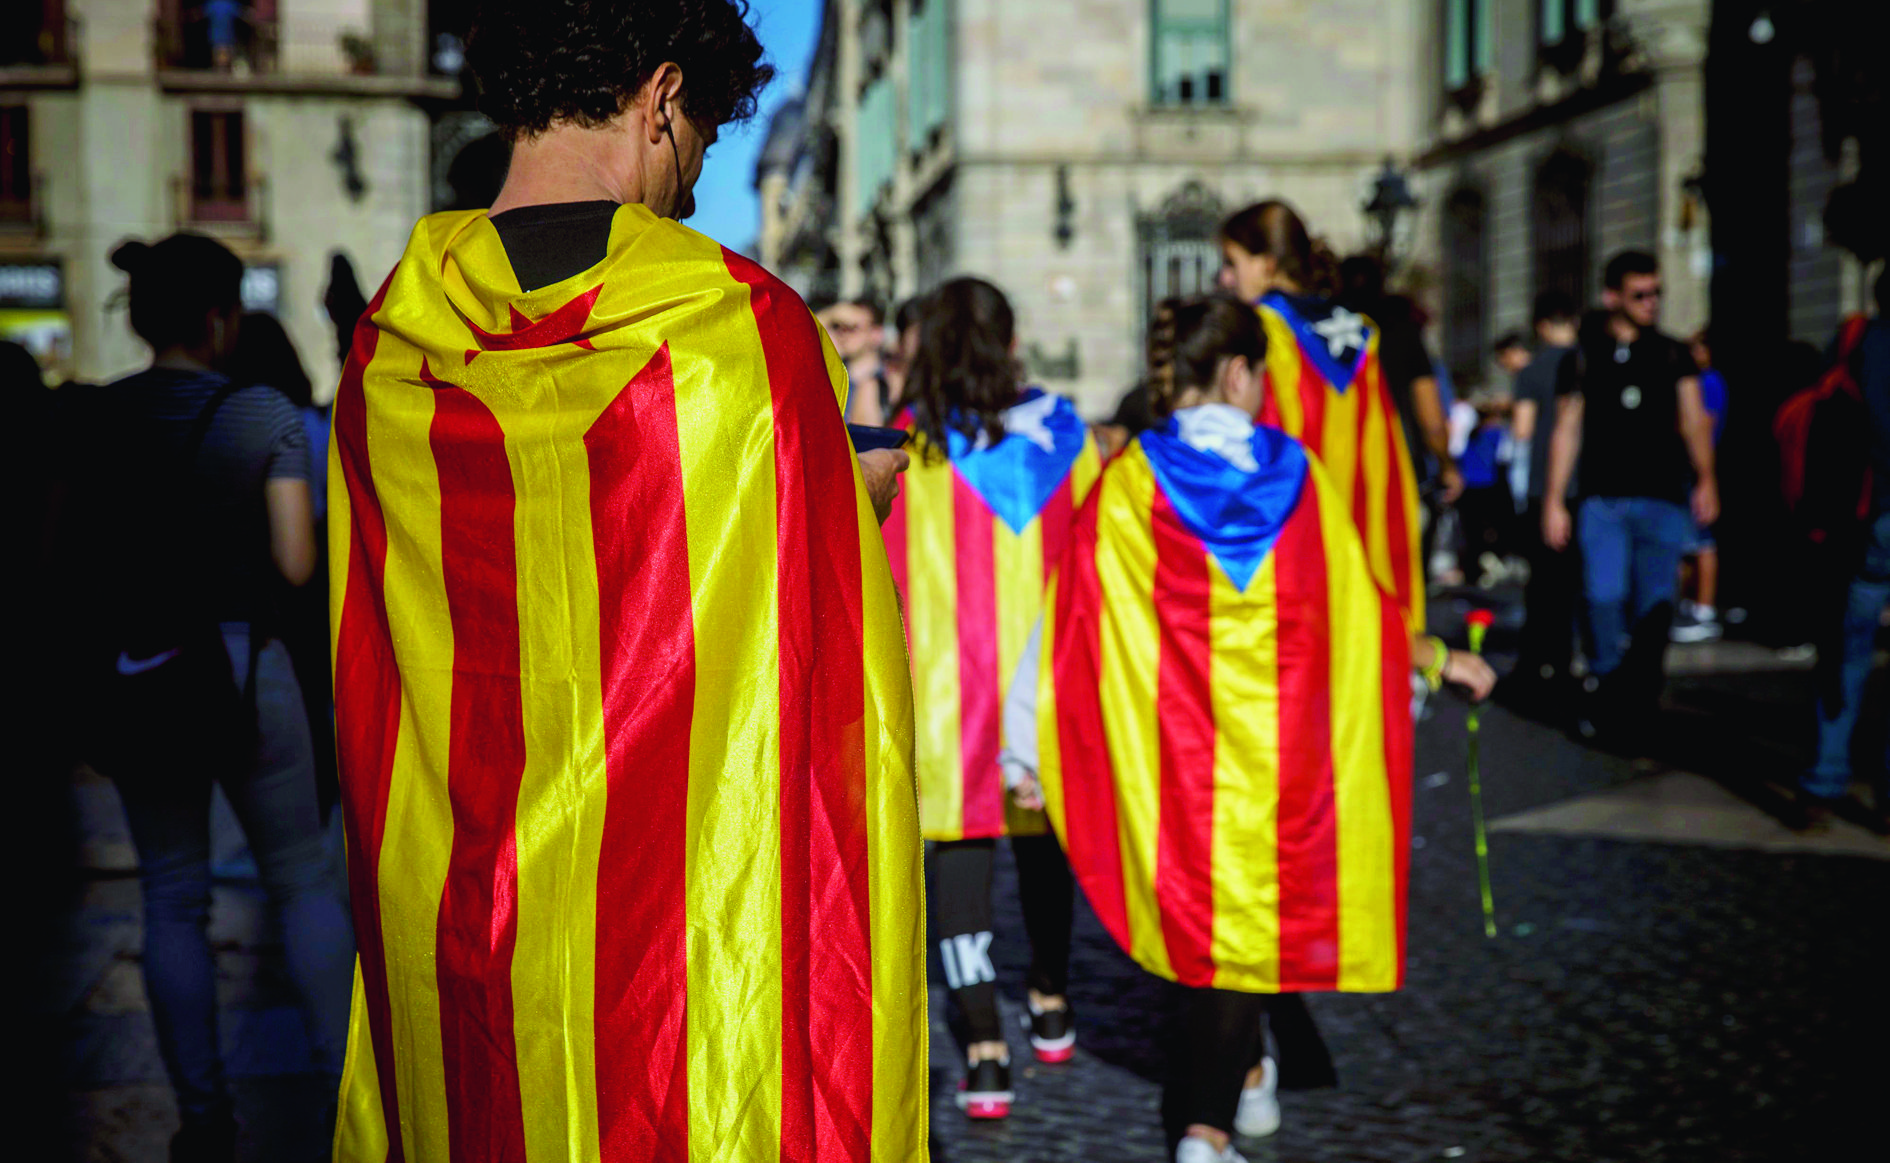 People draped in independence flags gather outside the Generalitat Palace, in Barcelona, Spain, Thursday, Oct. 26, 2017. Puigdemont said Thursday he considered calling a snap election, but was choosing not to because he didn't receive enough guarantees that the government's "abusive" moves to take control of Catalonia would be suspended. (AP Photo/Santi Palacios) Spain Catalonia